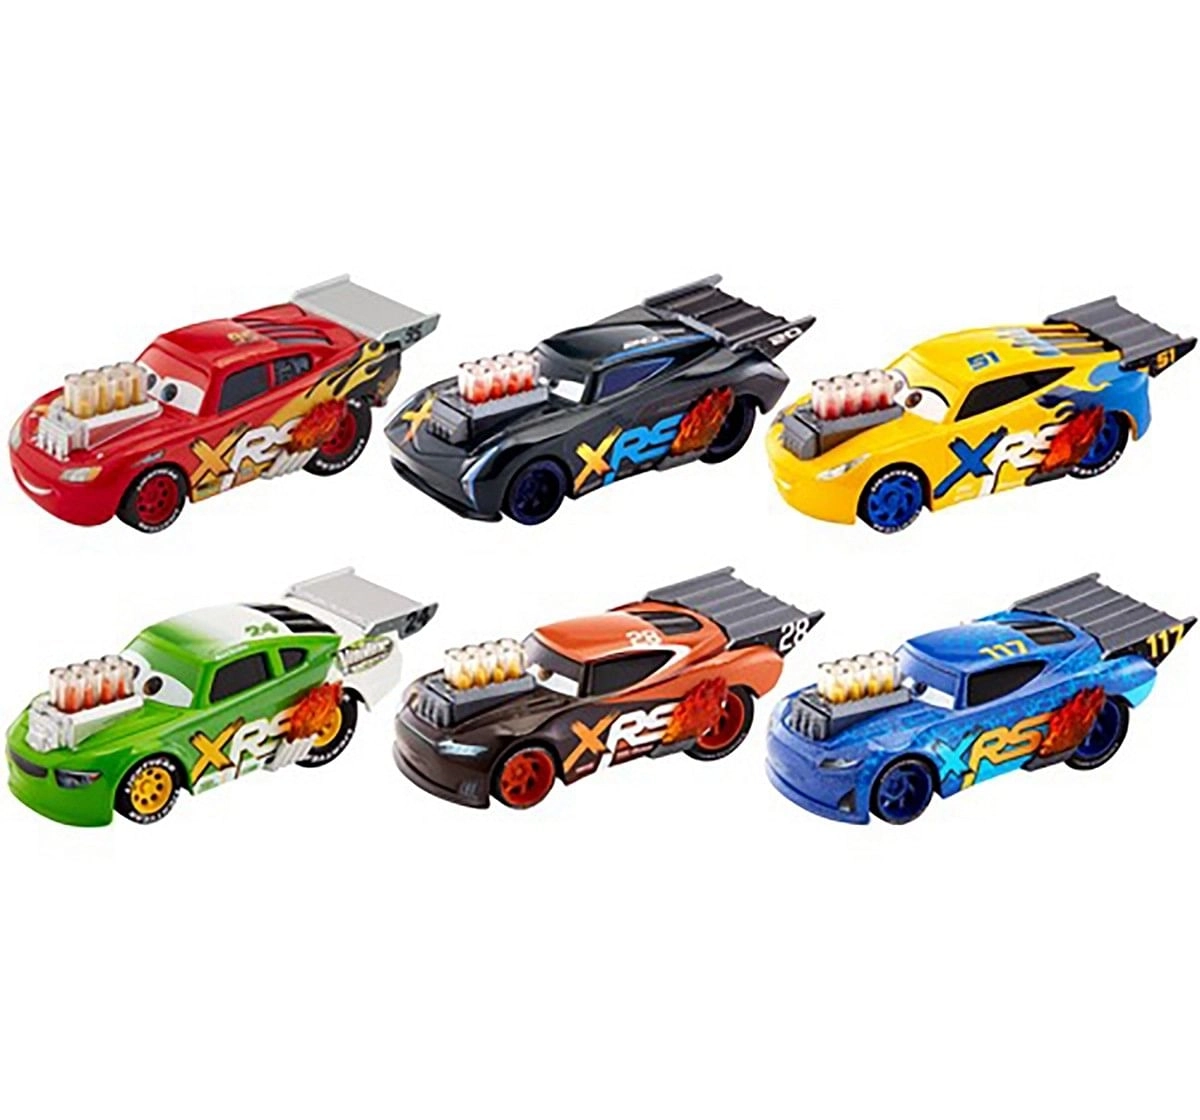 Hotwheels Cars Xrs 1:55  Vehicles for Kids age 3Y+, Assorted